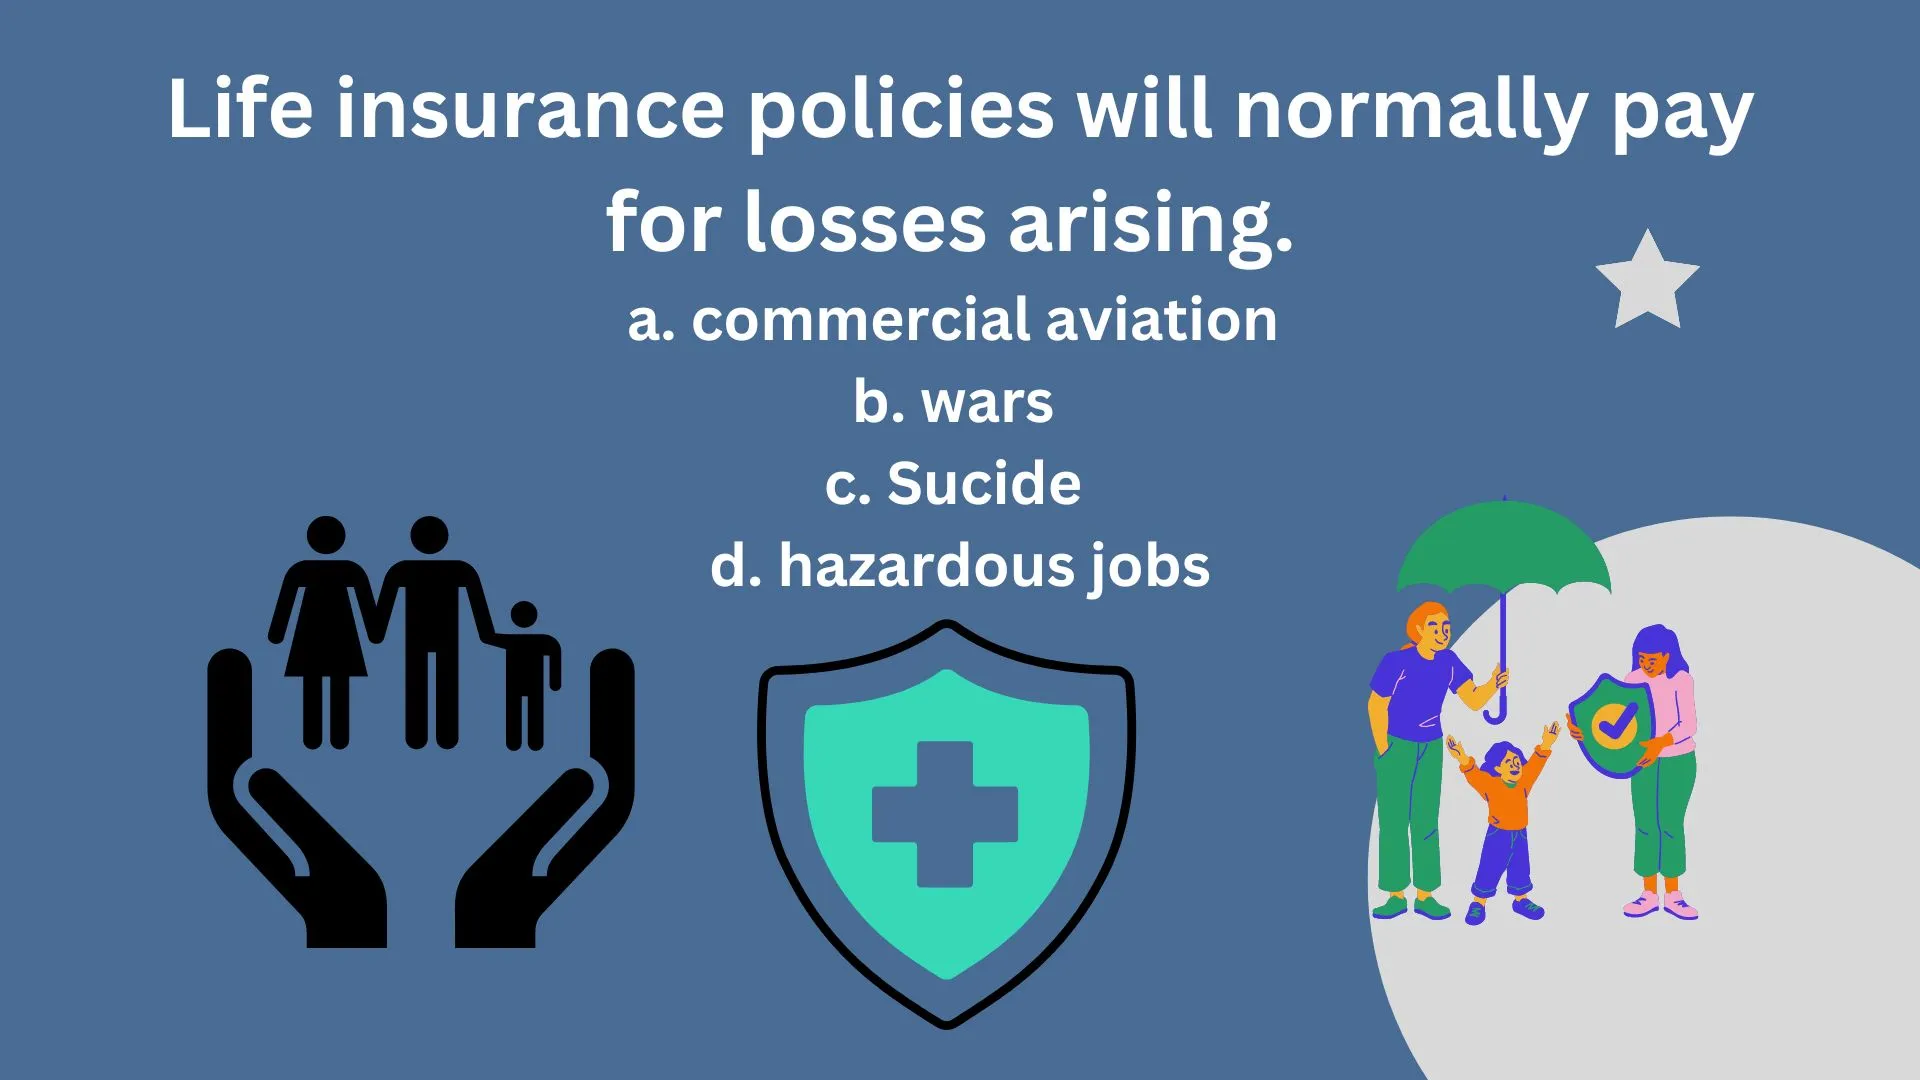 Life insurance policies will normally pay for losses arising from